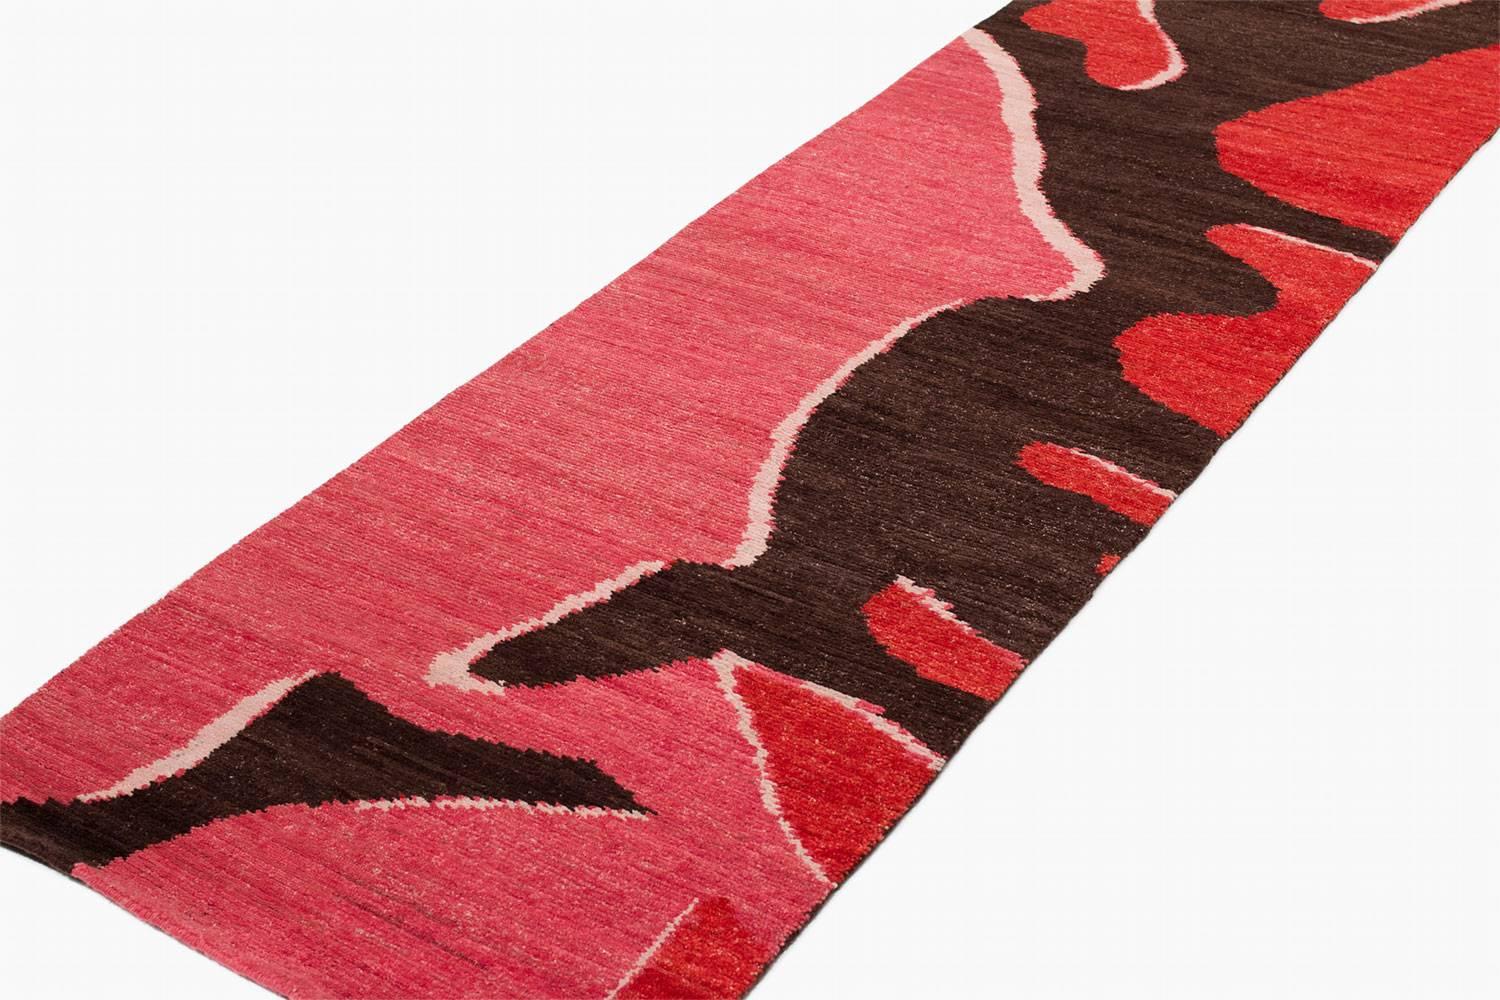 Bold and daring this handmade runner rug has bright pinks, deep browns and red accents - The design, which is reminiscent of Camo patterns was inspired by abstract forms in nature meets Pop Art!

All designs offered in custom sizes, colors, and